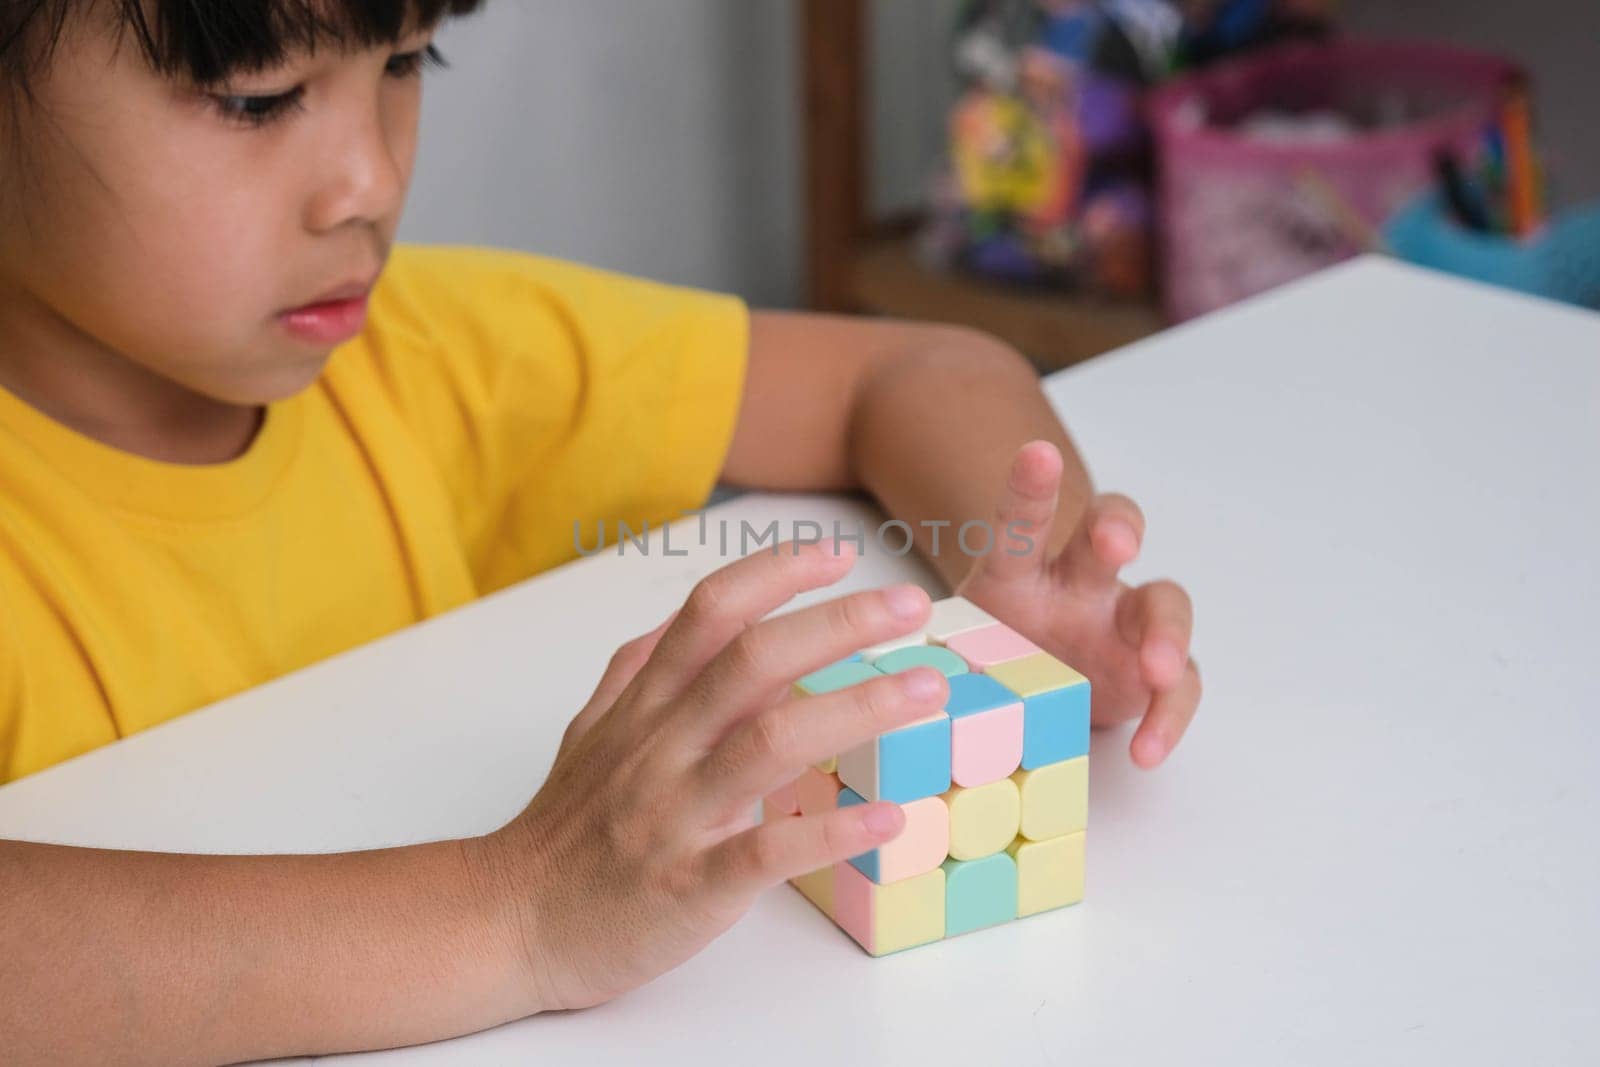 Asian little cute girl holding Rubik's cube in her hands and playing with it. Rubik's cube is a game that increases intelligence for children. Educational toys for children by TEERASAK